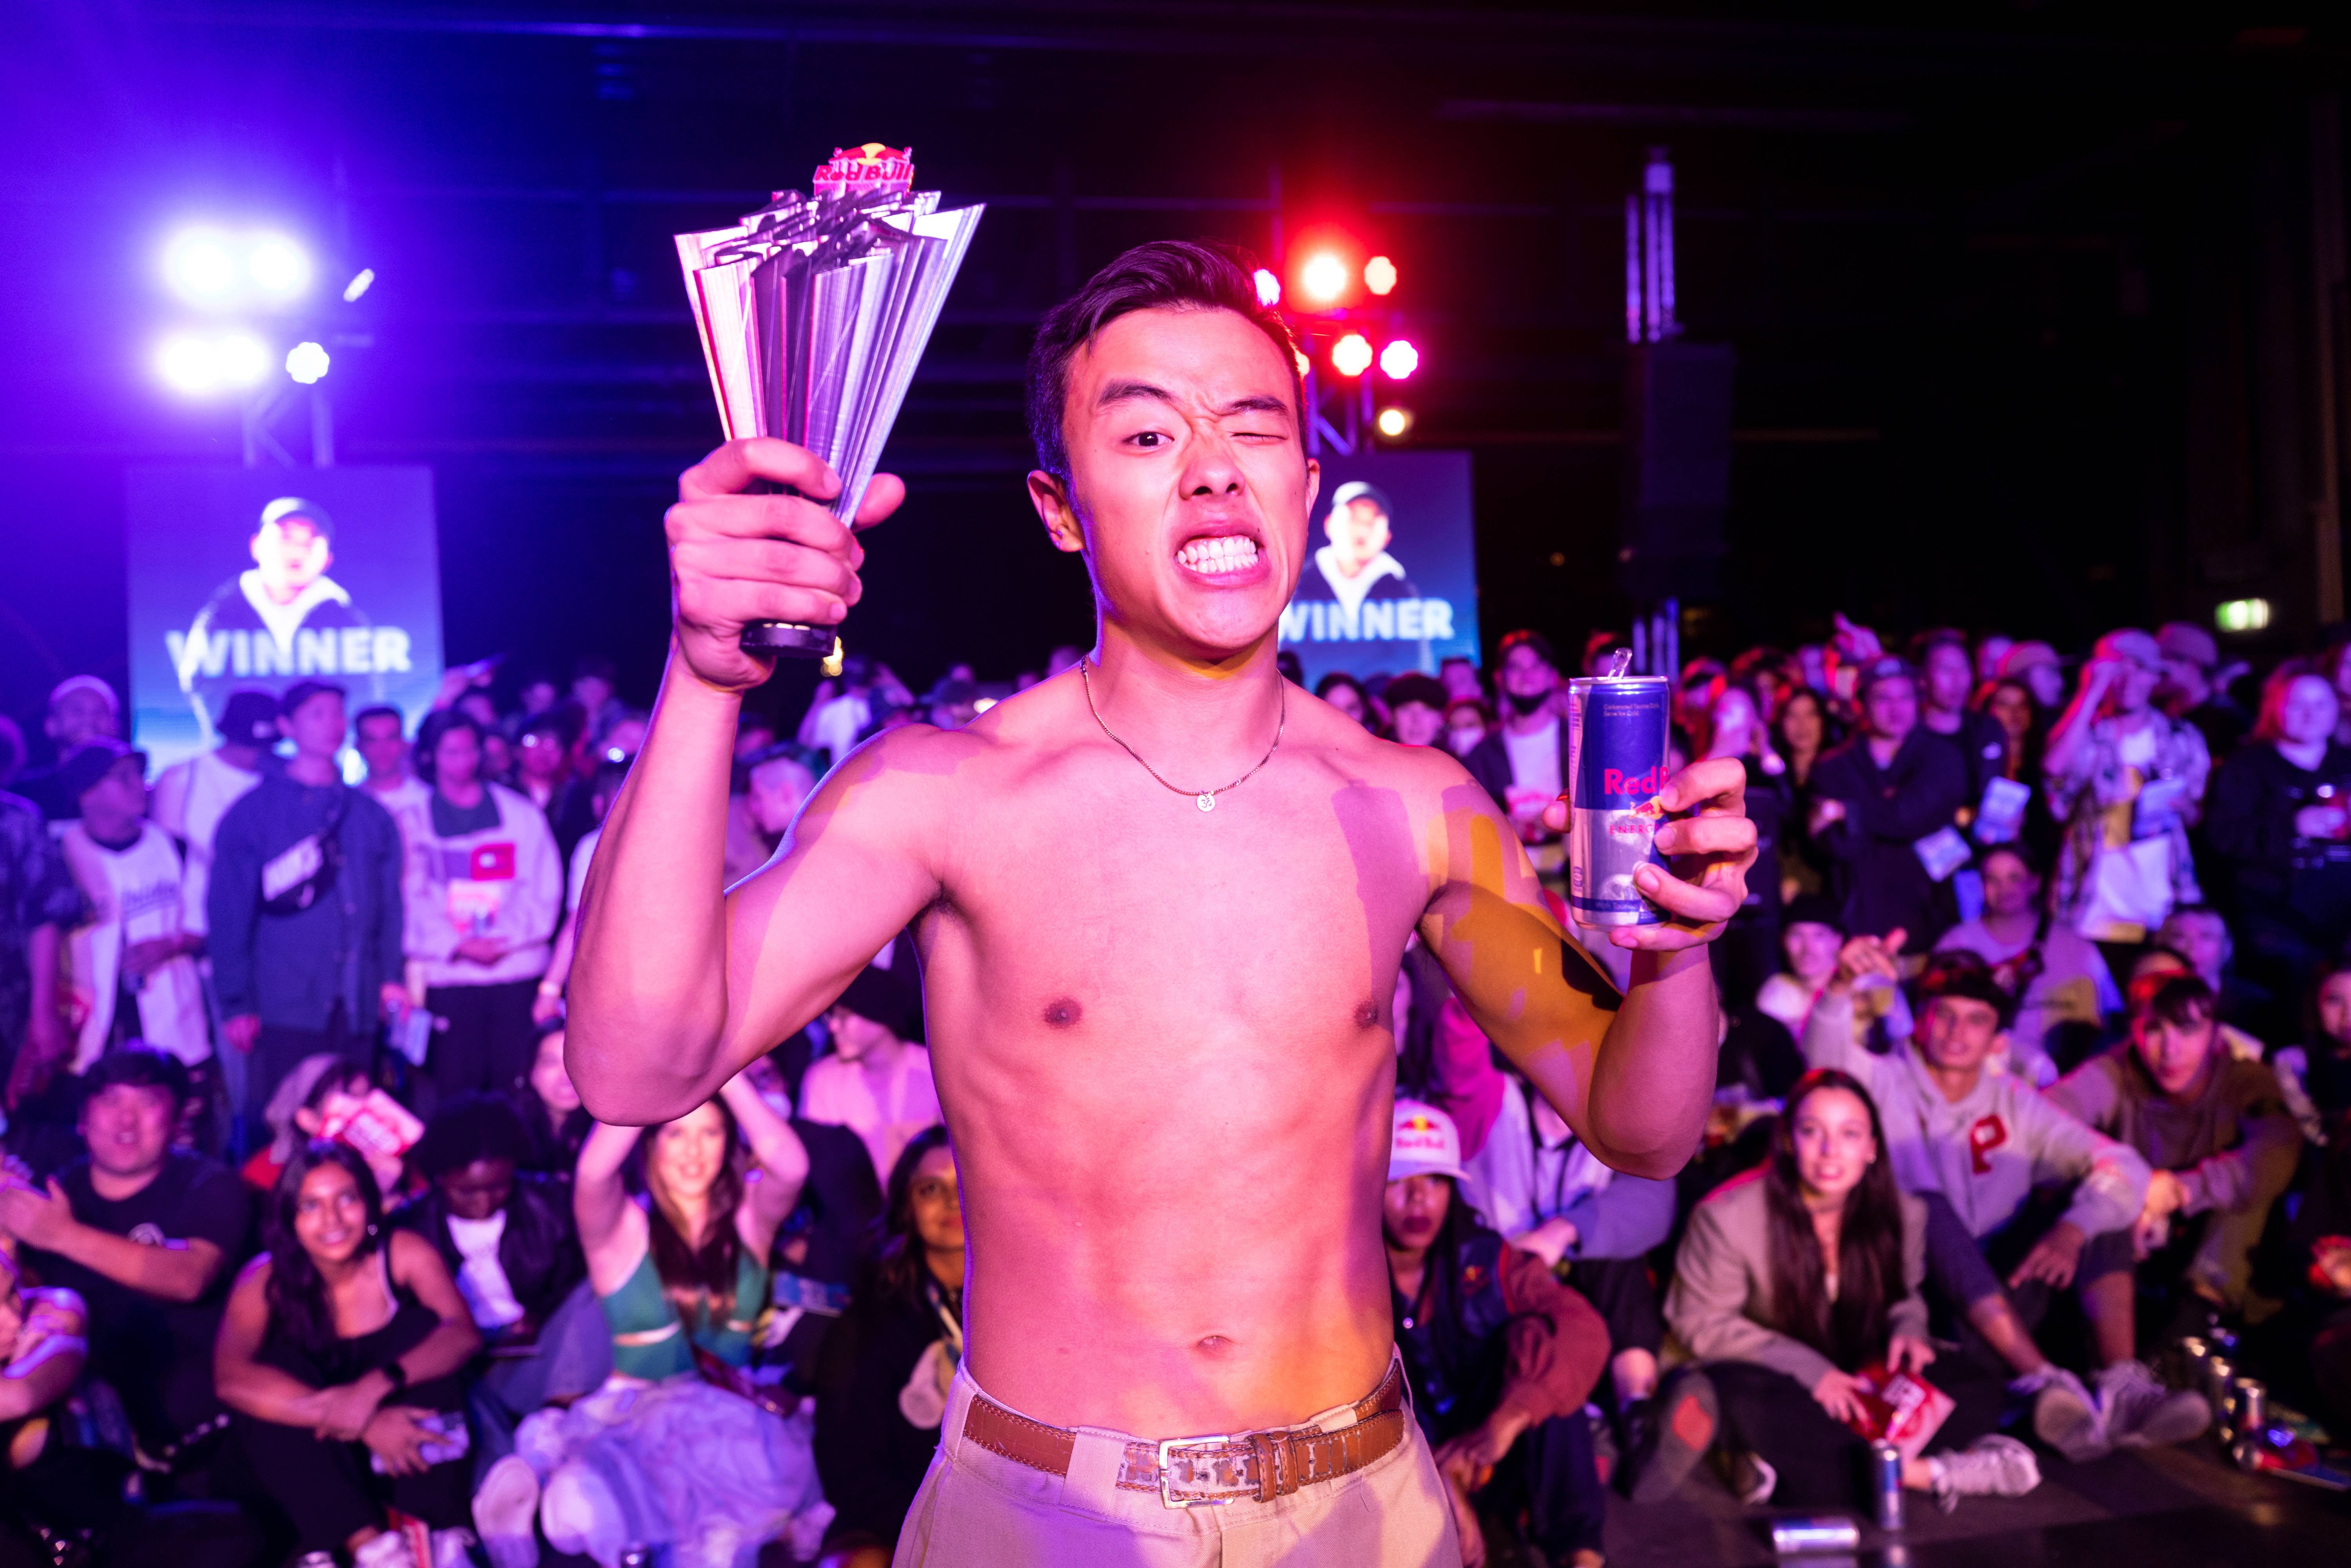 Koh Yamada, the winner of Red Bull's Dance Your Style National Final, stands in front of a crowd holding a trophy